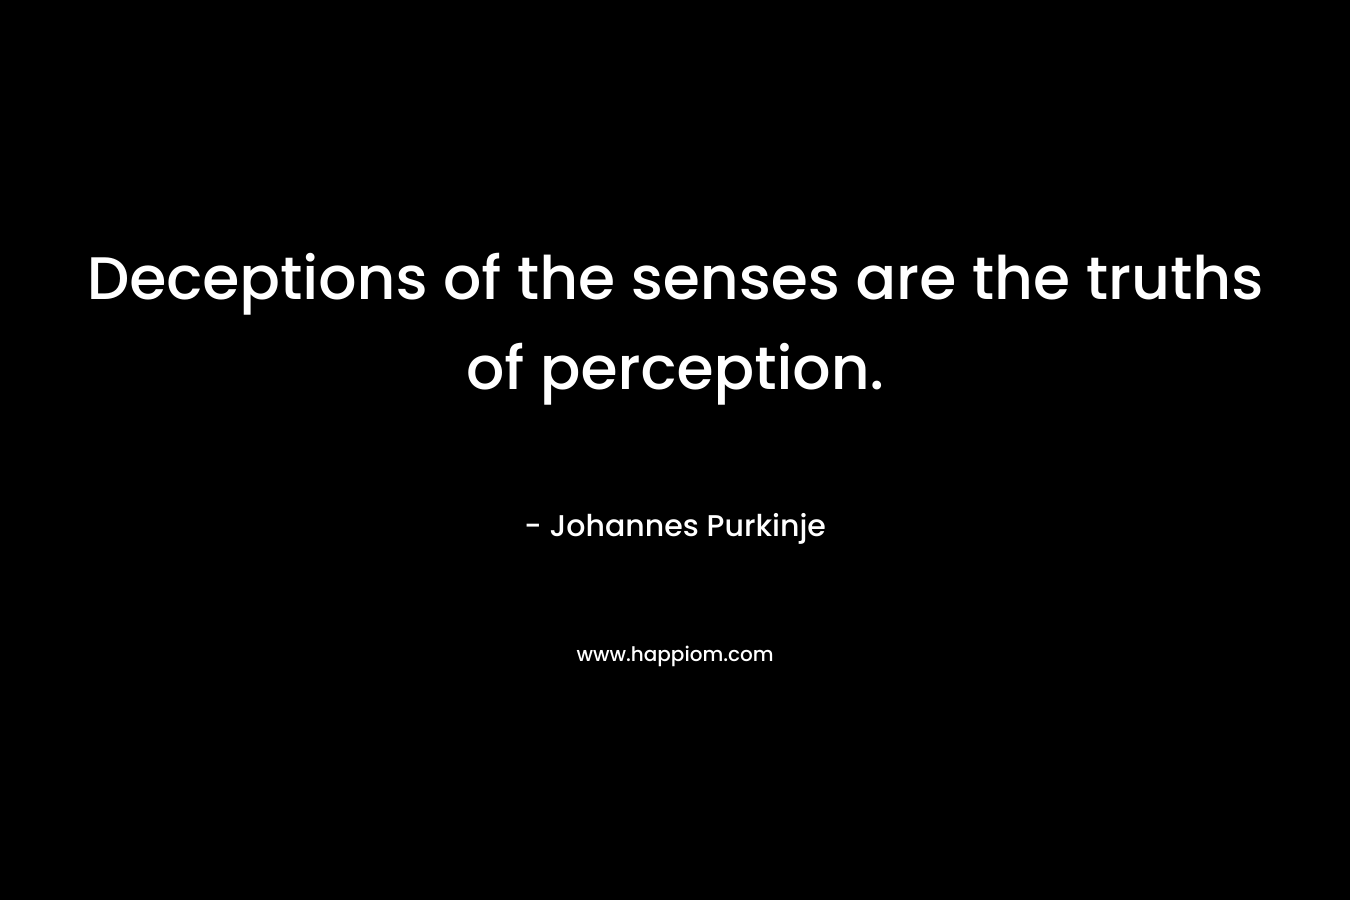 Deceptions of the senses are the truths of perception. – Johannes Purkinje